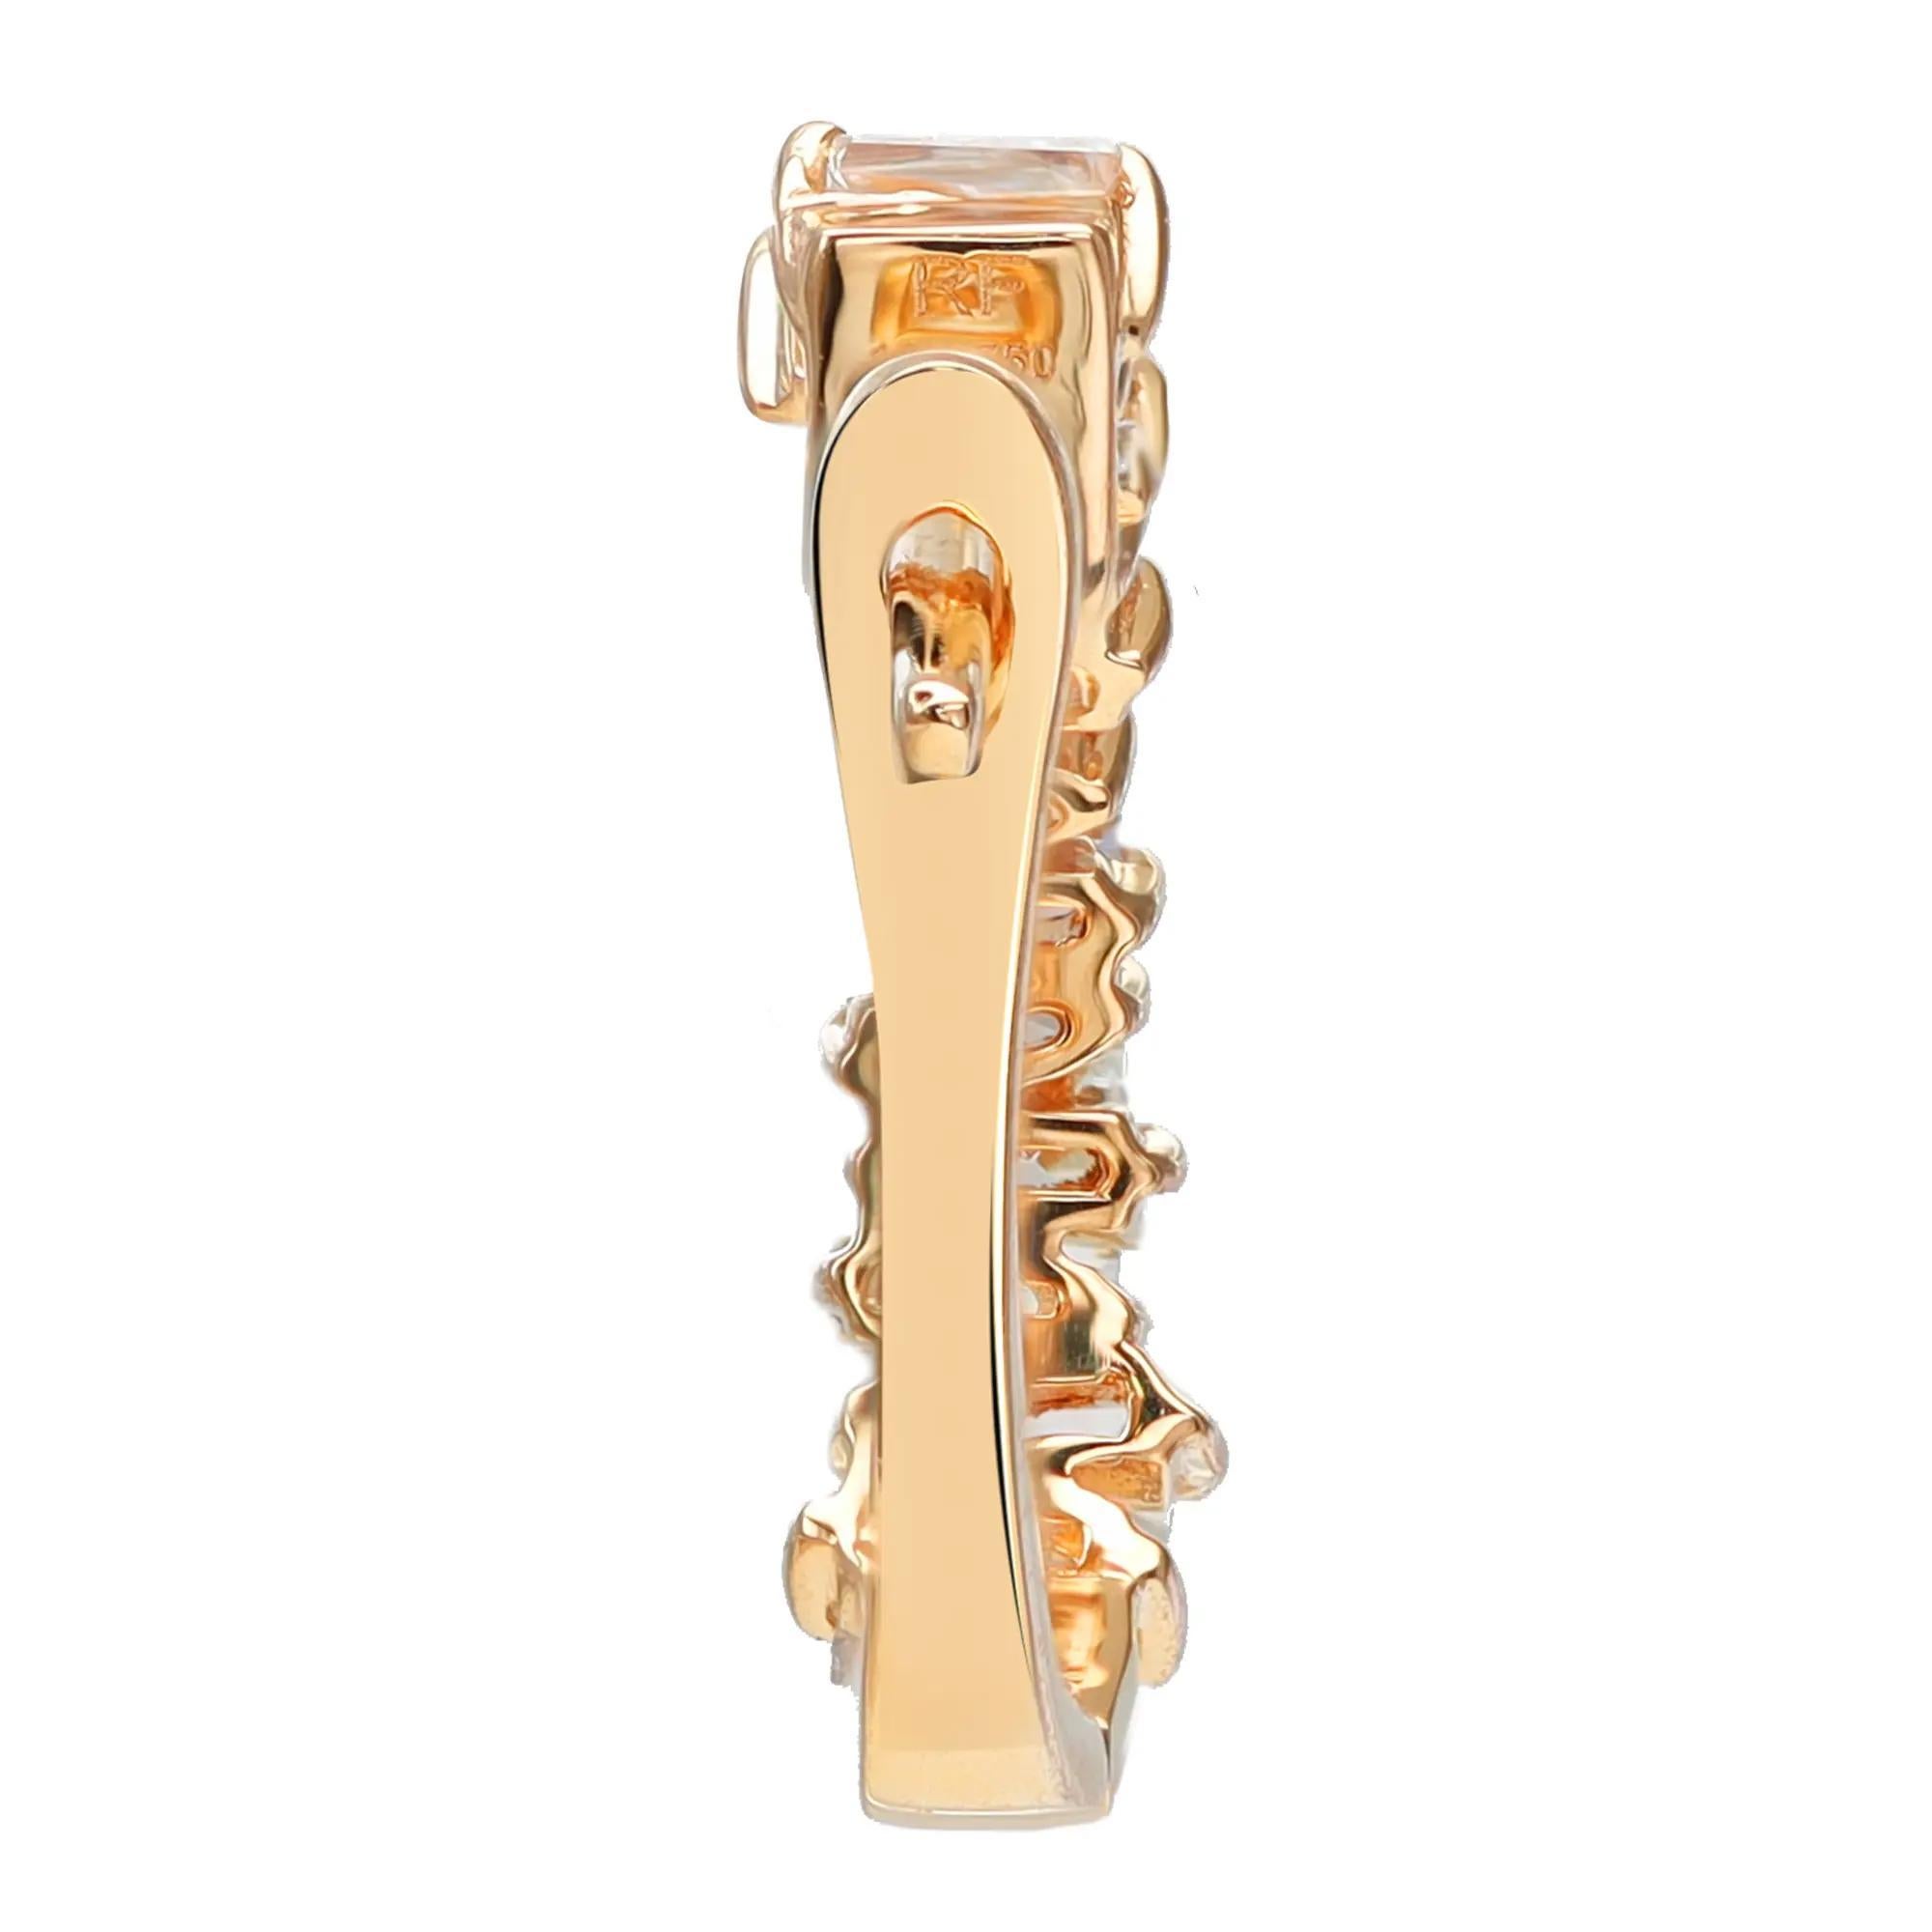 Sparkle all way with these beautiful diamond huggie earrings. Crafted in fine 18K yellow gold. These earrings feature prong set tapered baguette diamonds encrusted halfway through the earring. Total diamond weight: 0.72 carat. Diamond color G-H and